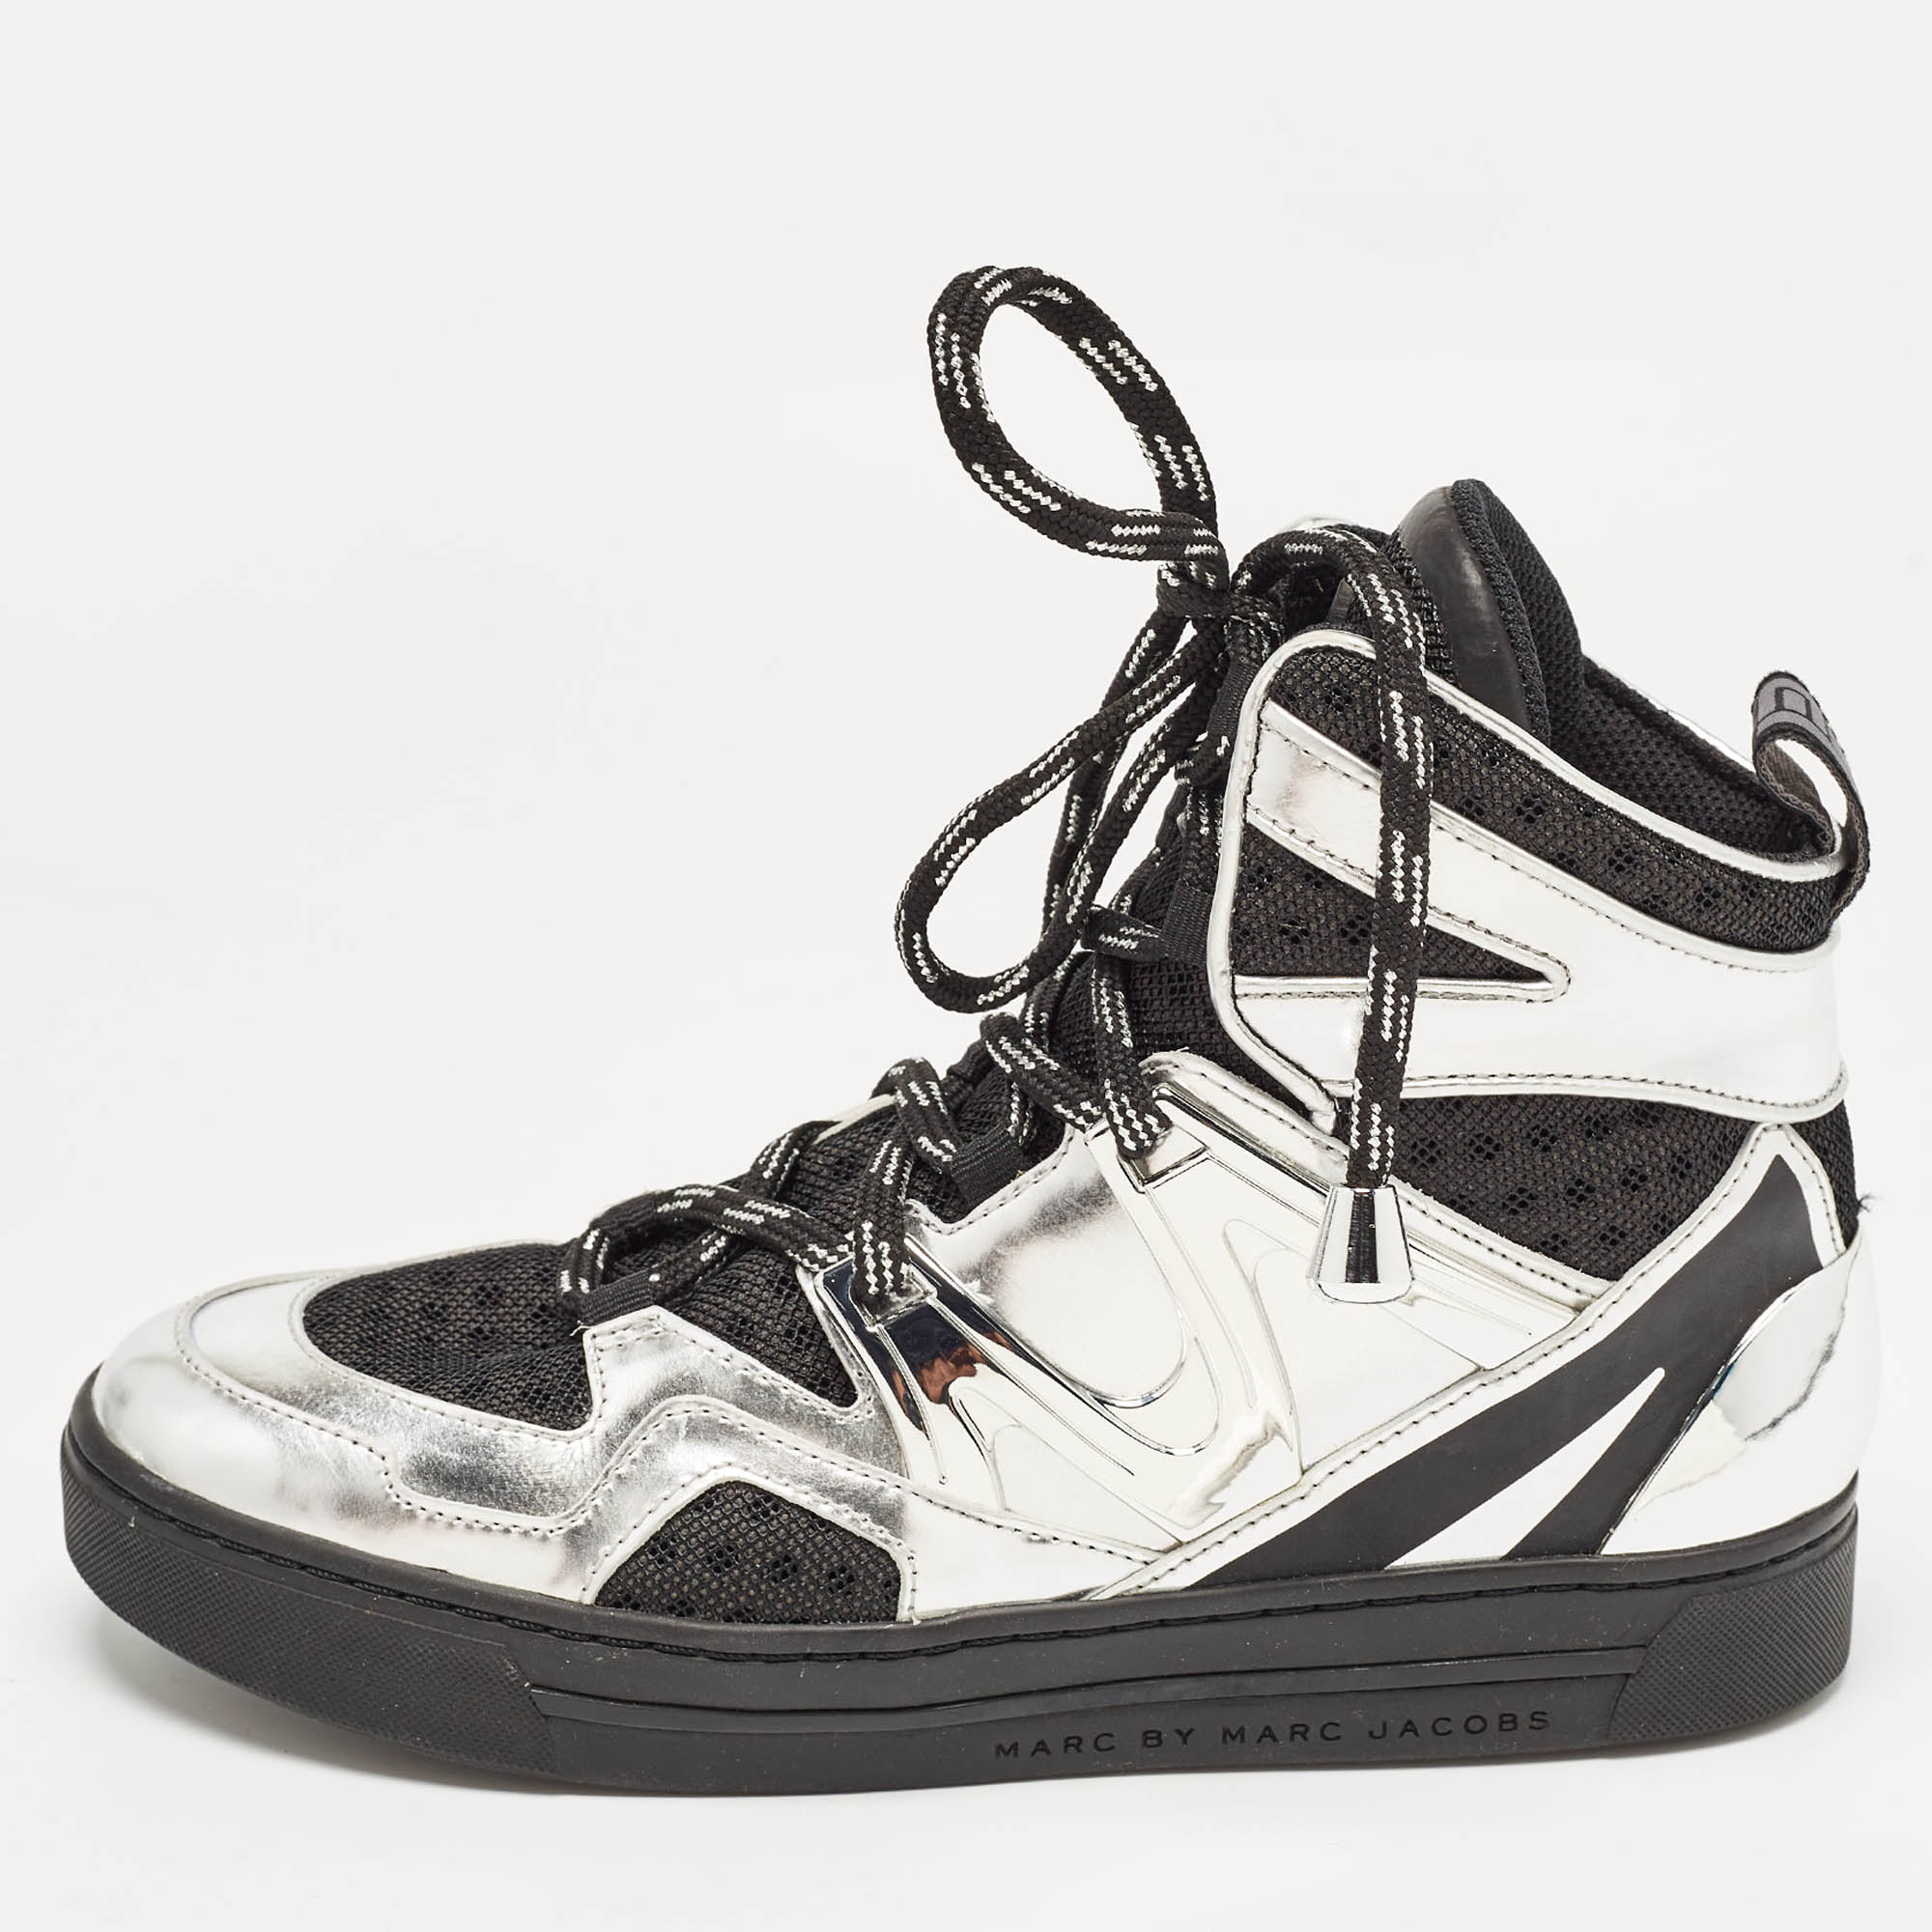 Marc by marc jacobs silver leather and mesh high top sneakers size 36